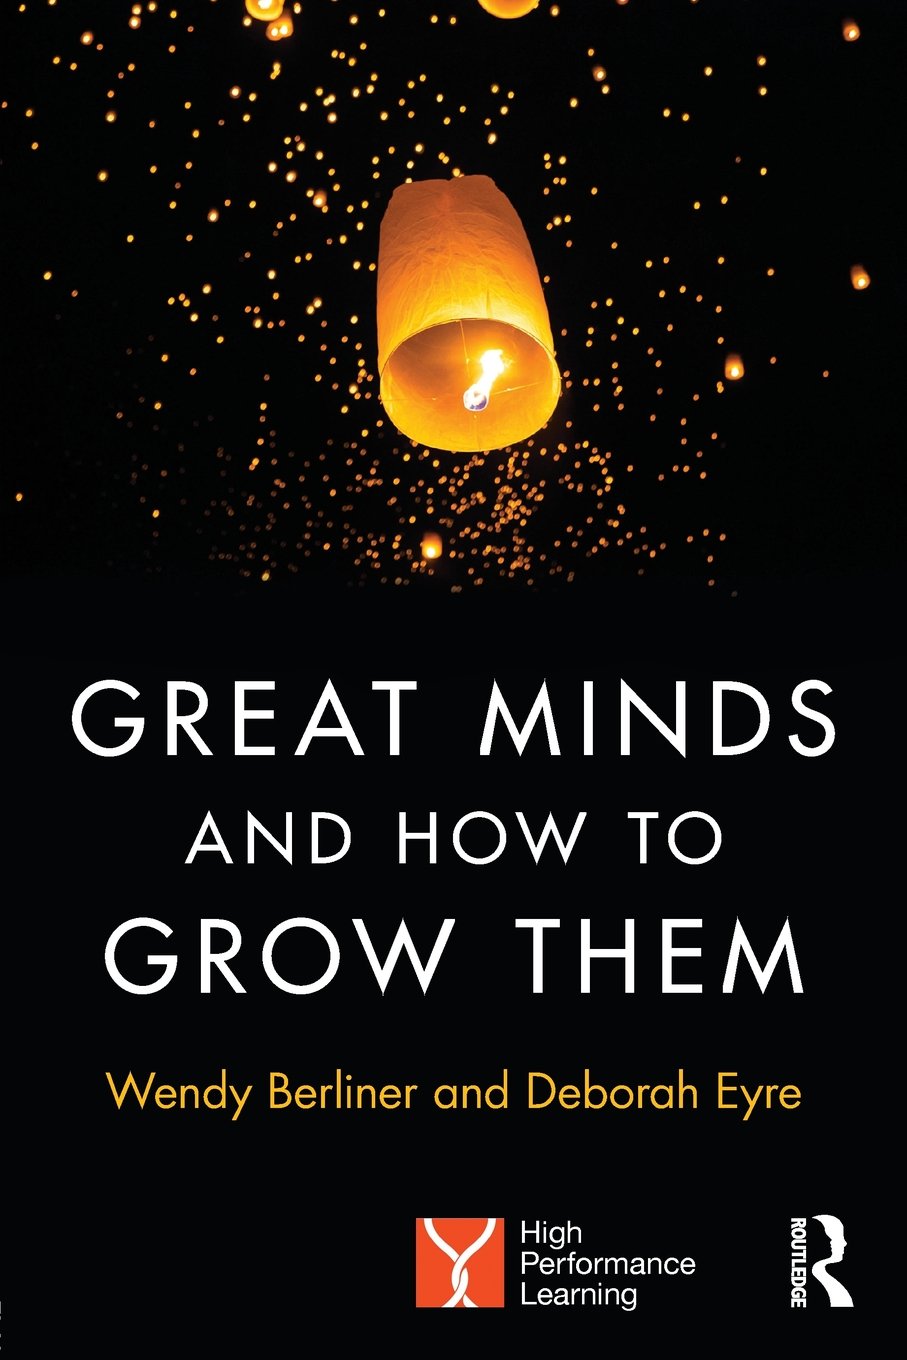 Great Minds and How to Grow Them | Wendy Berliner